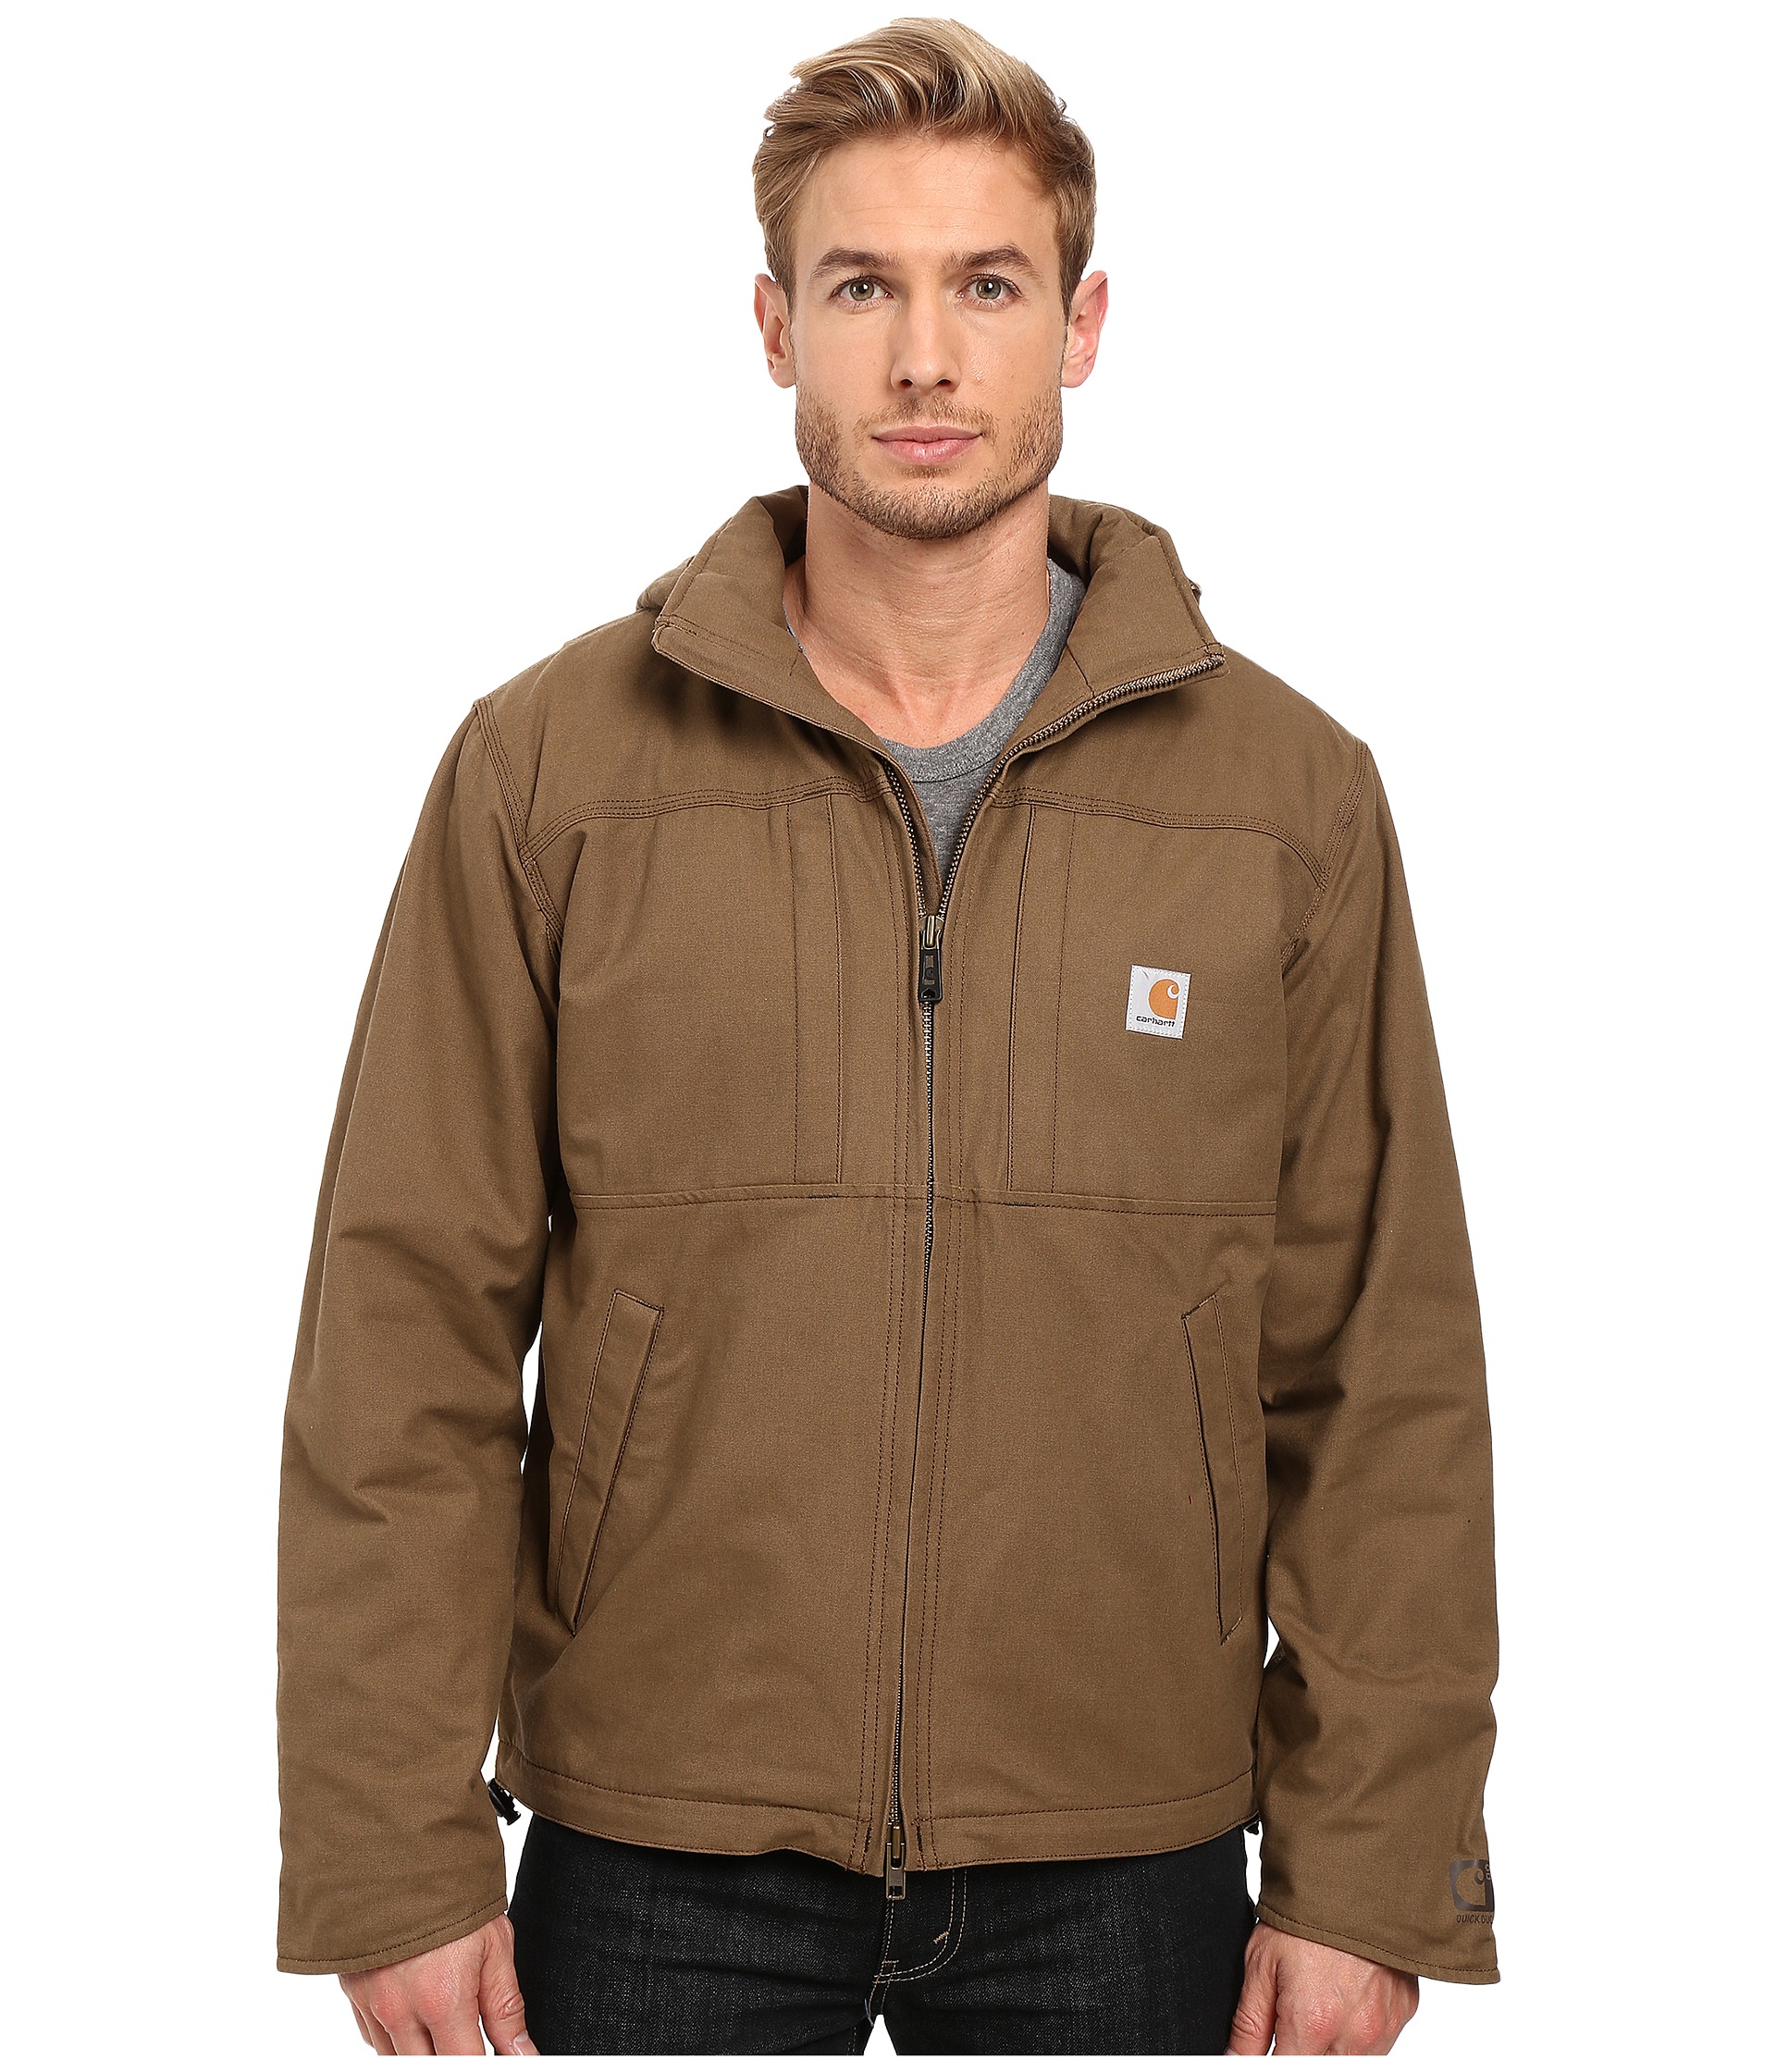 Carhartt Full Swing Cryder Jacket Canyon Brown - Zappos.com Free ...